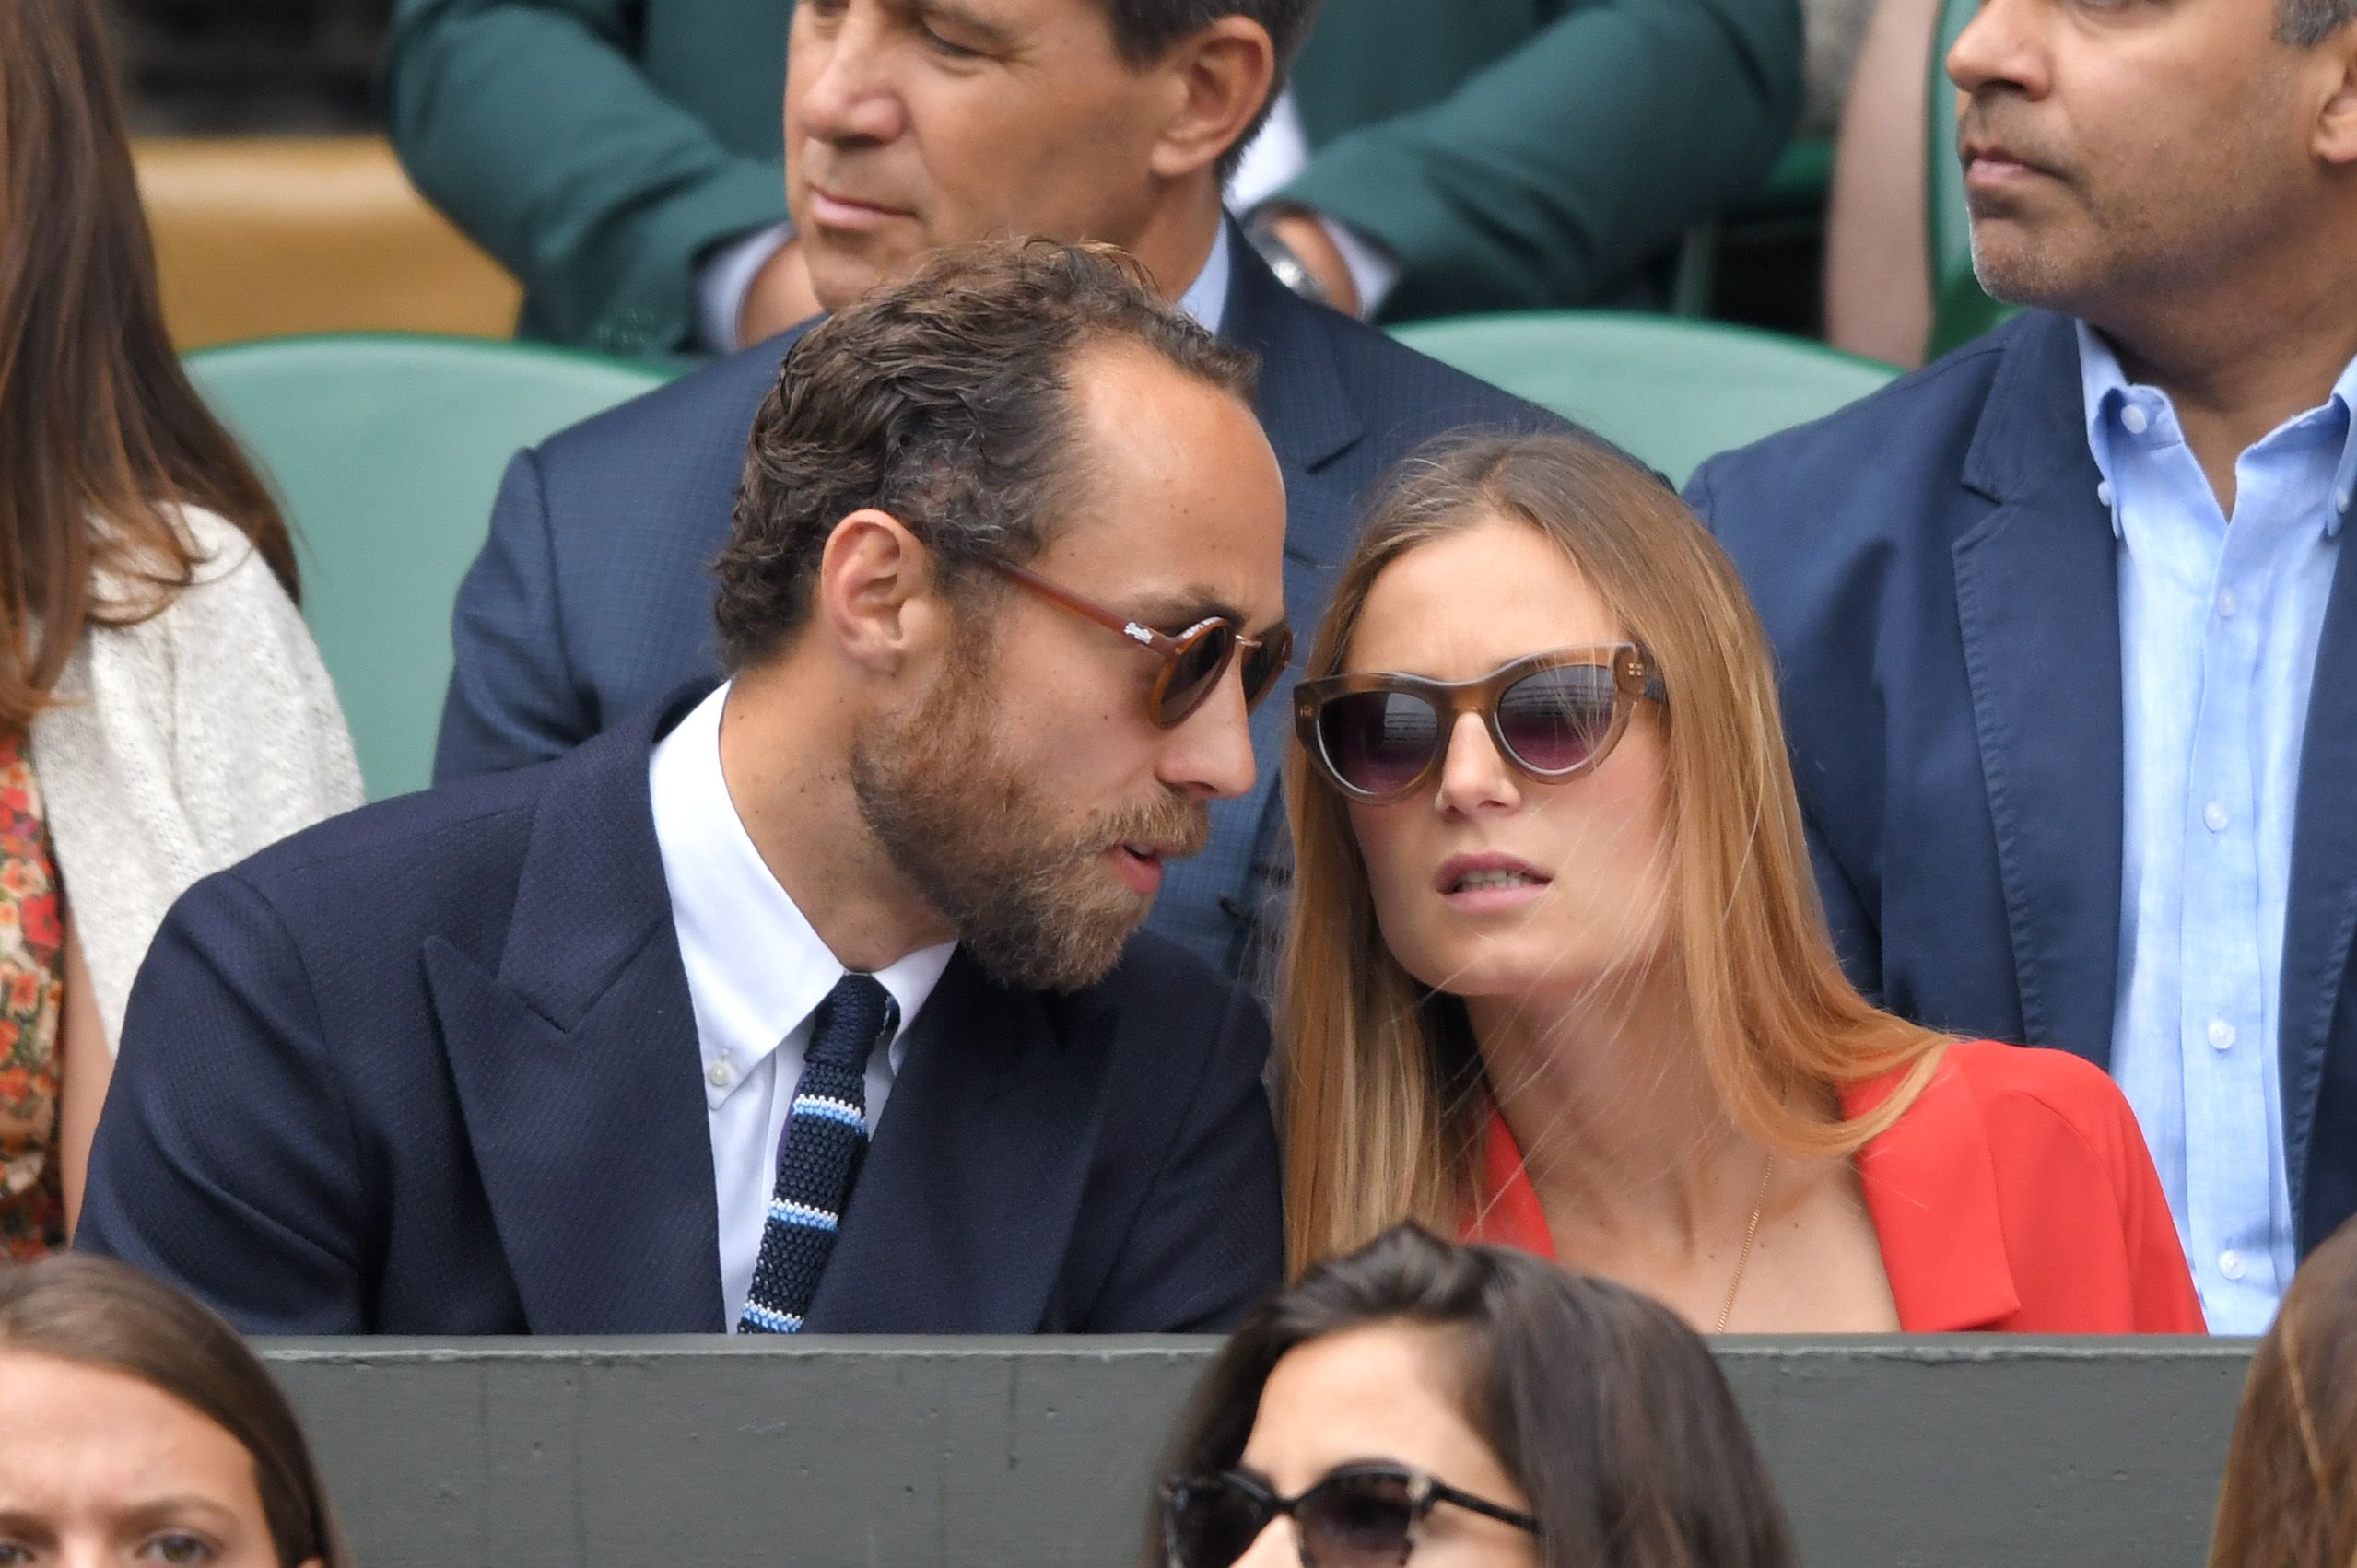 James Middleton and Alizee Thevenet attend the Men's Finals Day of the Wimbledon Tennis Championships at All England Lawn Tennis and Croquet Club on July 14, 2019 in London, England. | Source: Getty Images